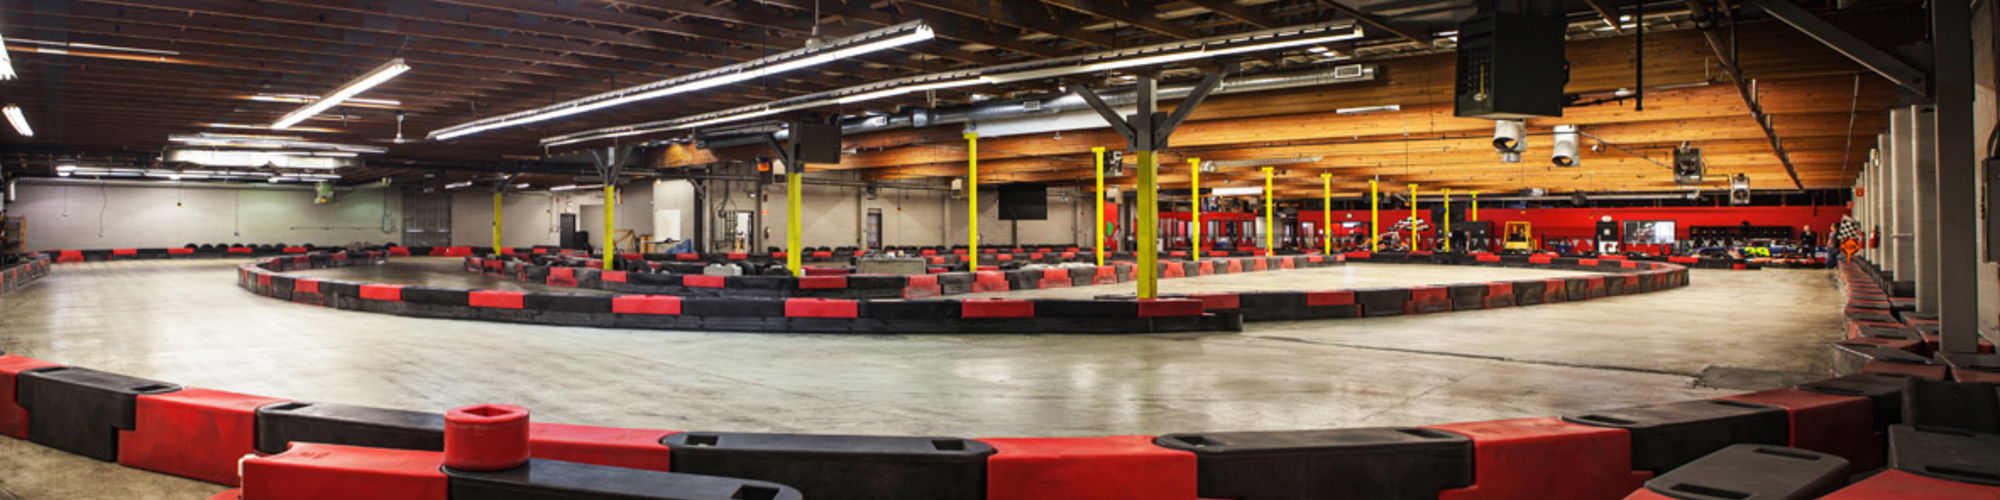 Fast Track Indoor Karting cover image